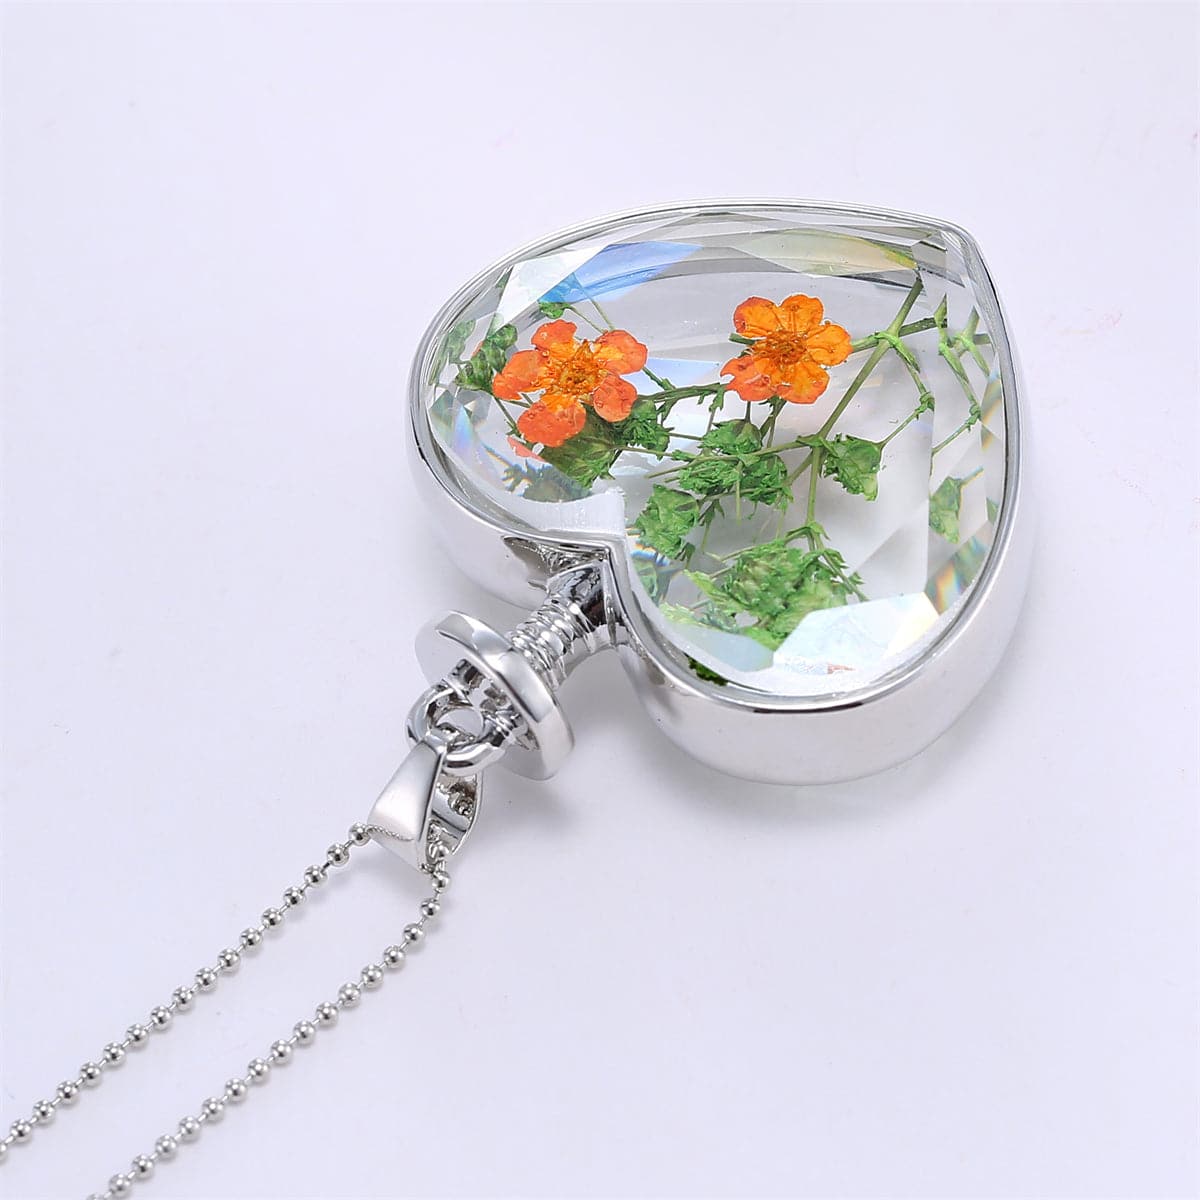 Pressed Peach Blossom & Silver-Plated Heart Pendant Necklace